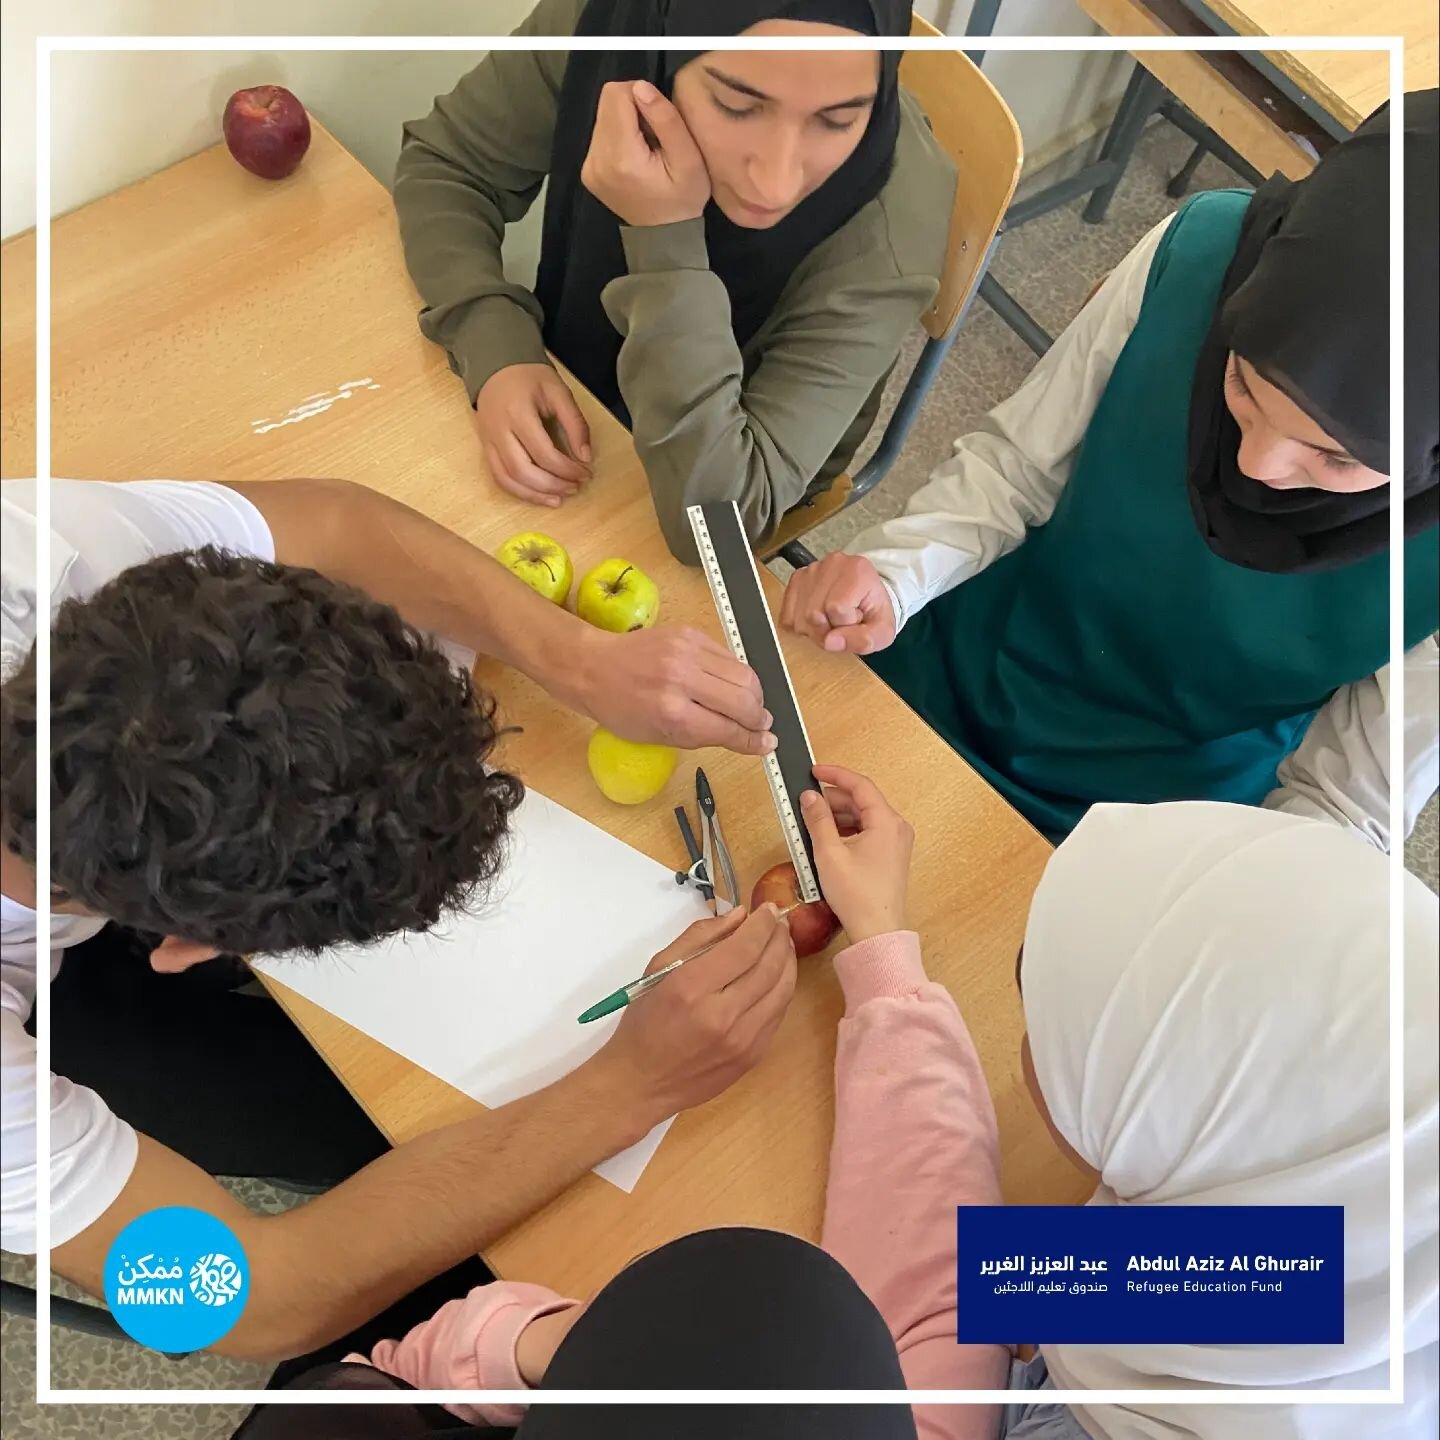 On this year's World Refugee Day, MMKN renews its commitment to work with youth from all backgrounds in the Public School, creating a better future through education for all.

With our programmatic approach: Volunteering + Education + Innovation = Em